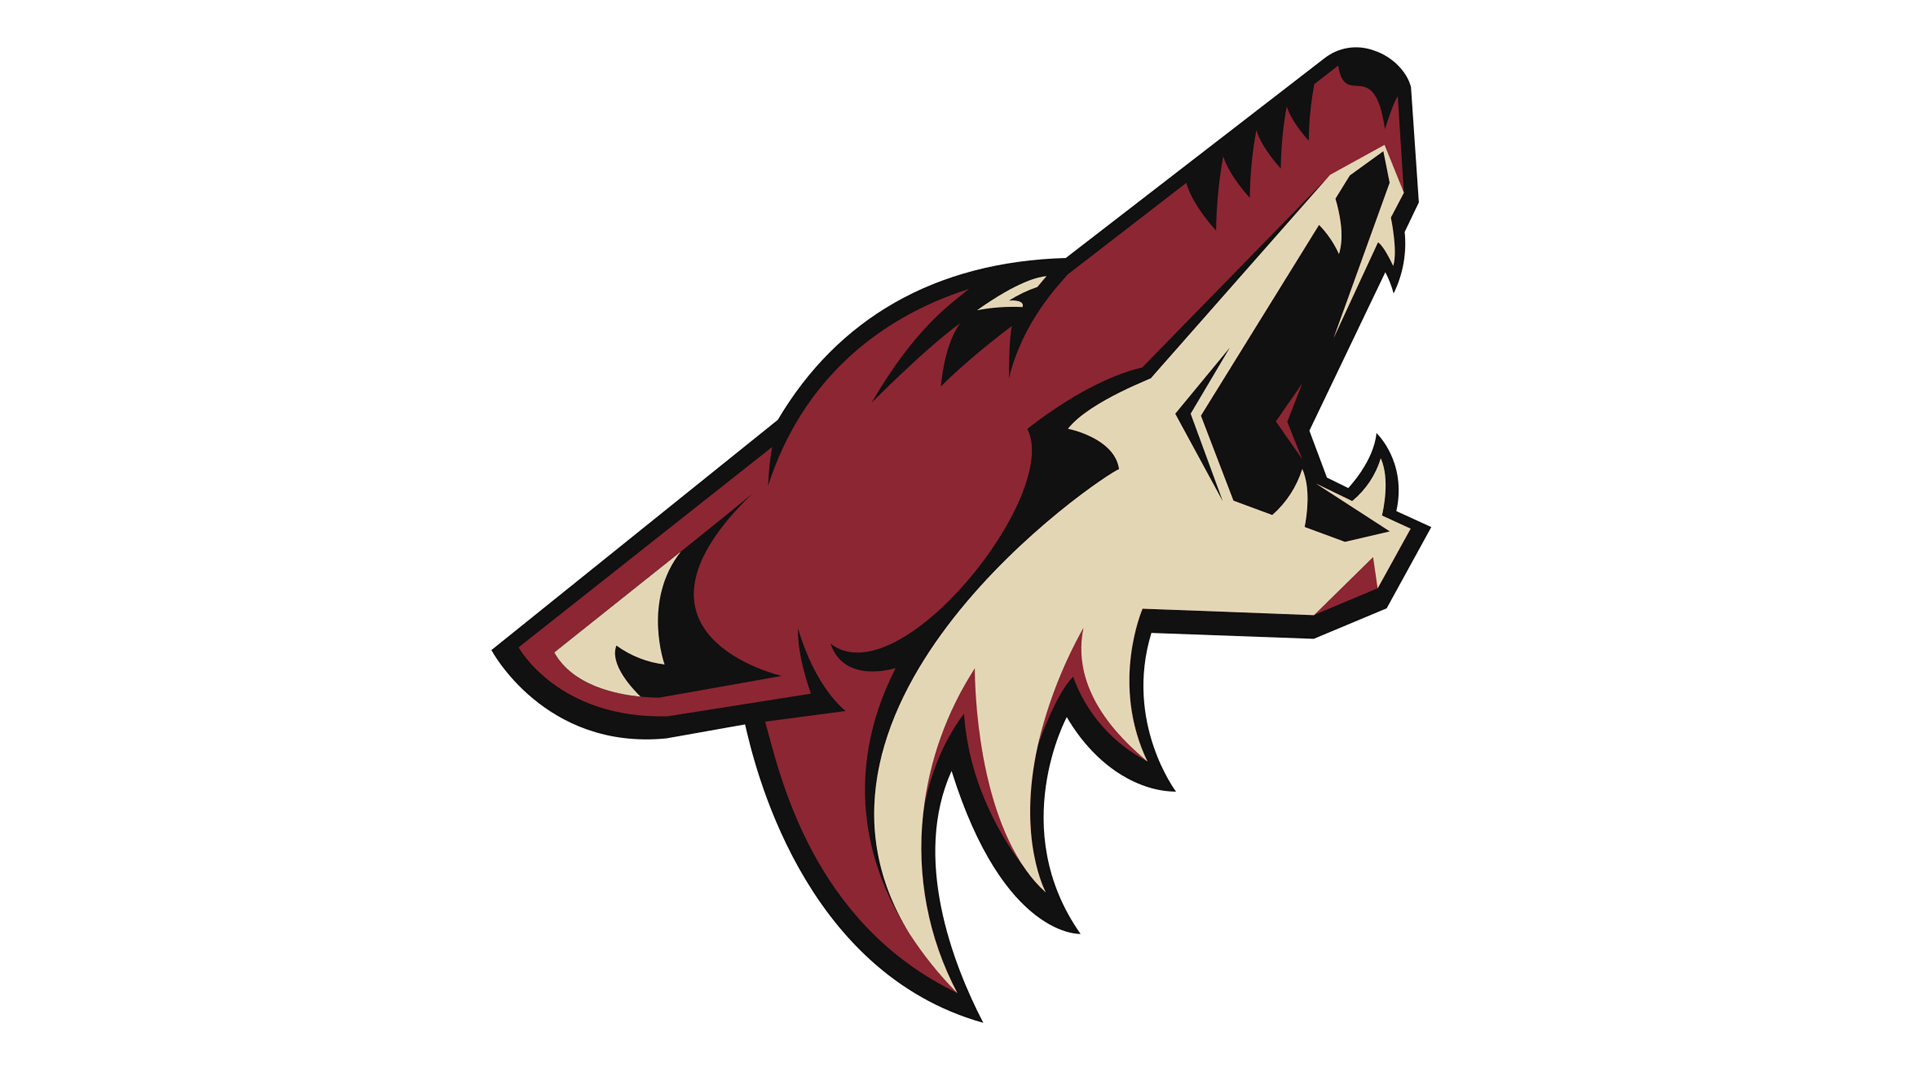 Coyotes Logo - Arizona Coyotes Logo, Arizona Coyotes Symbol, Meaning, History